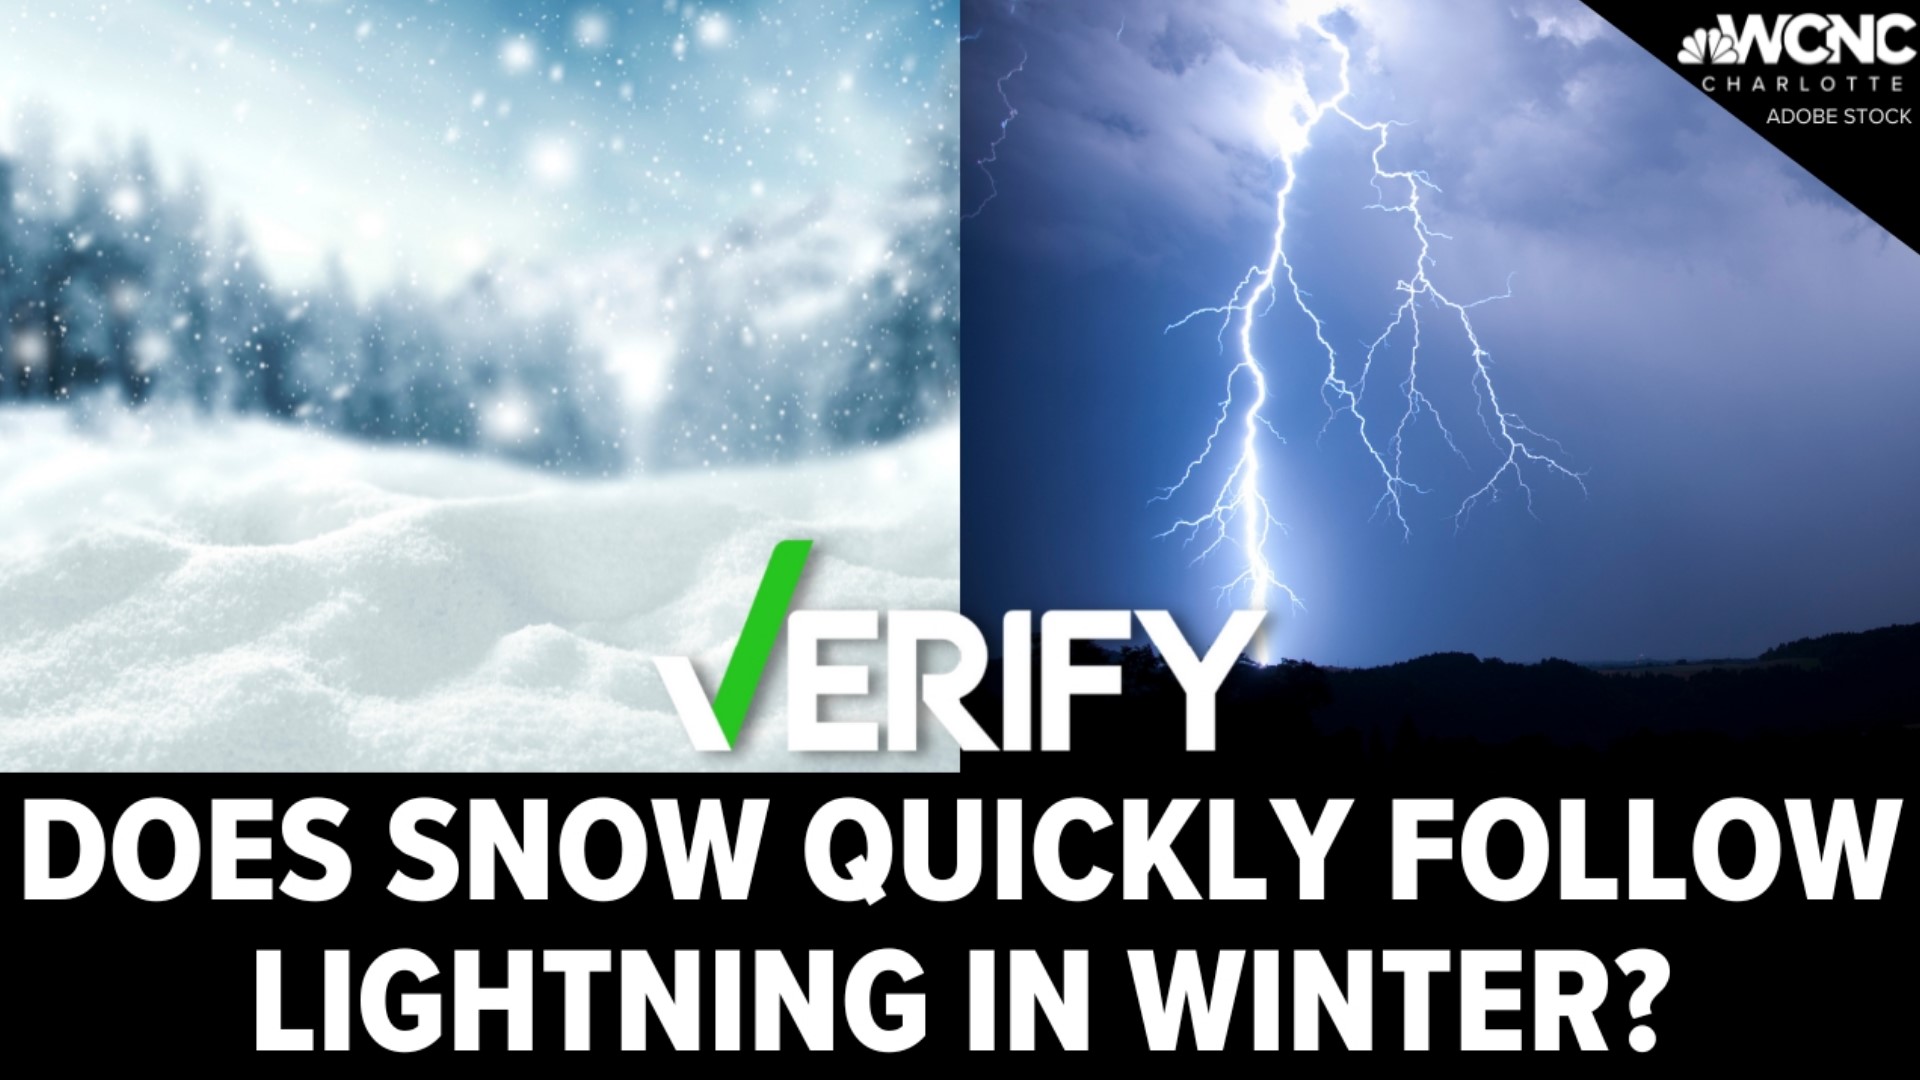 Numerous thunderstorms this winter have renewed the question about thunderstorms and snow.